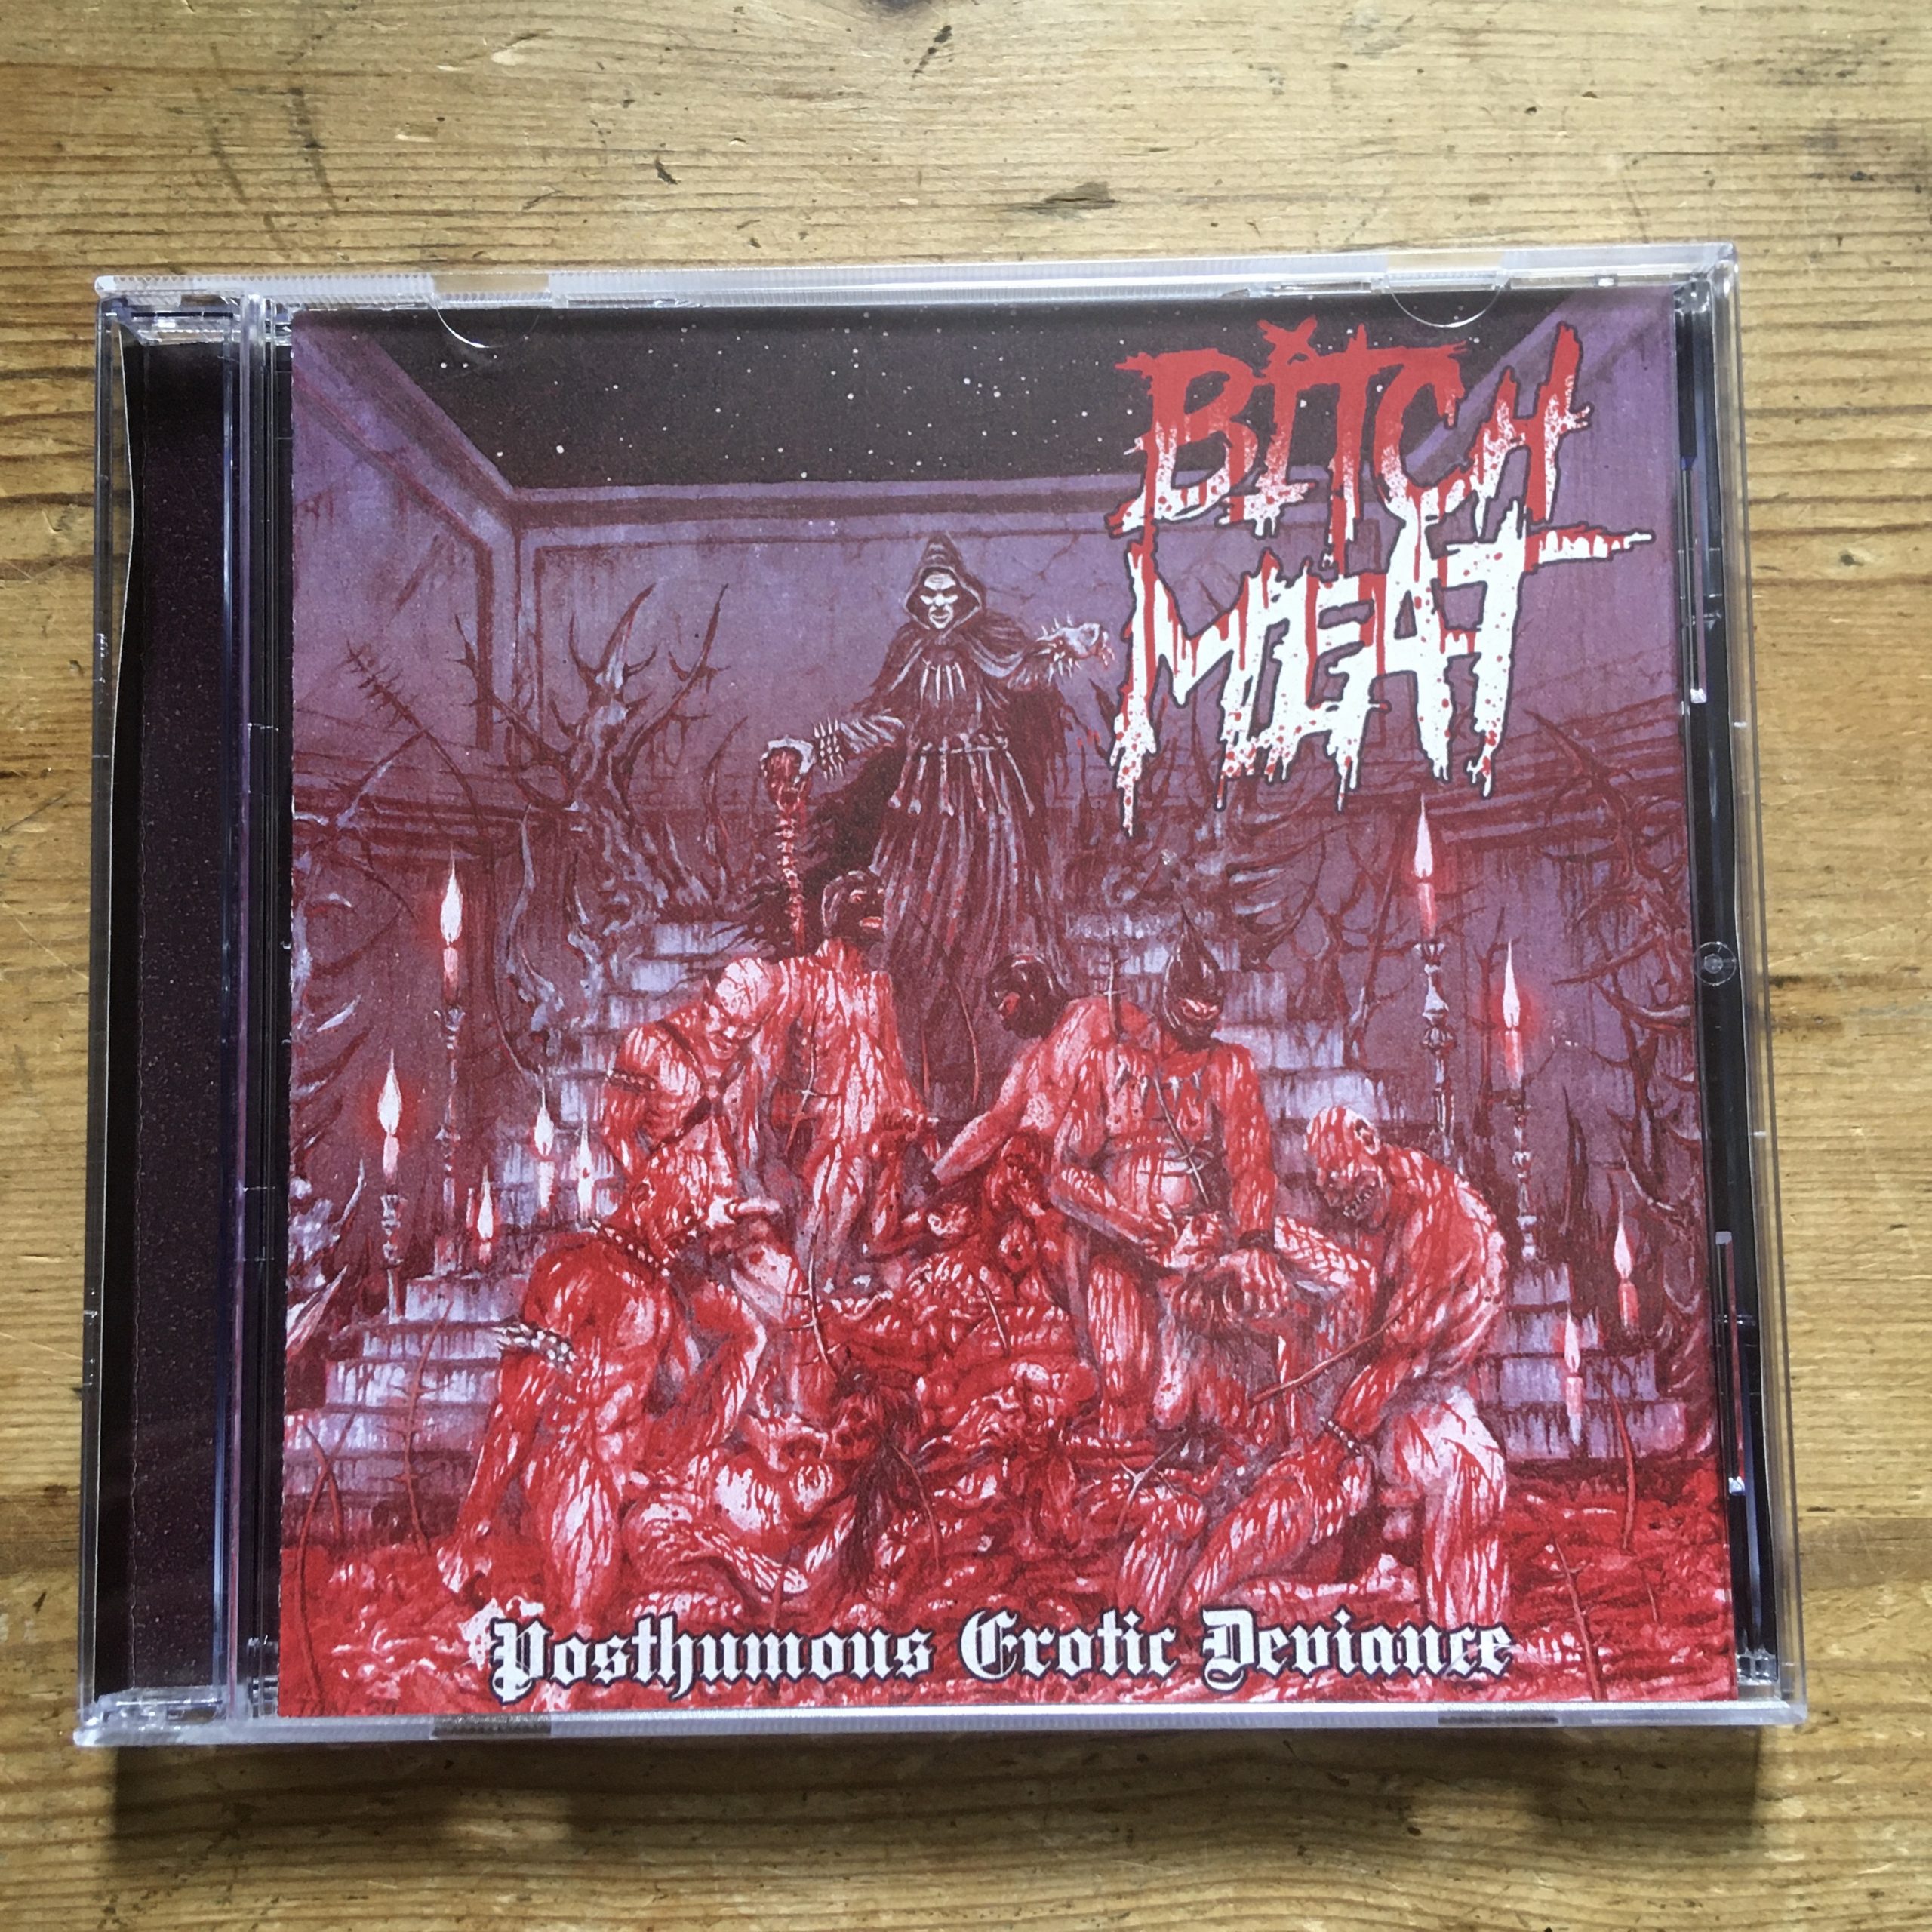 Photo of the Bitch Meat - 